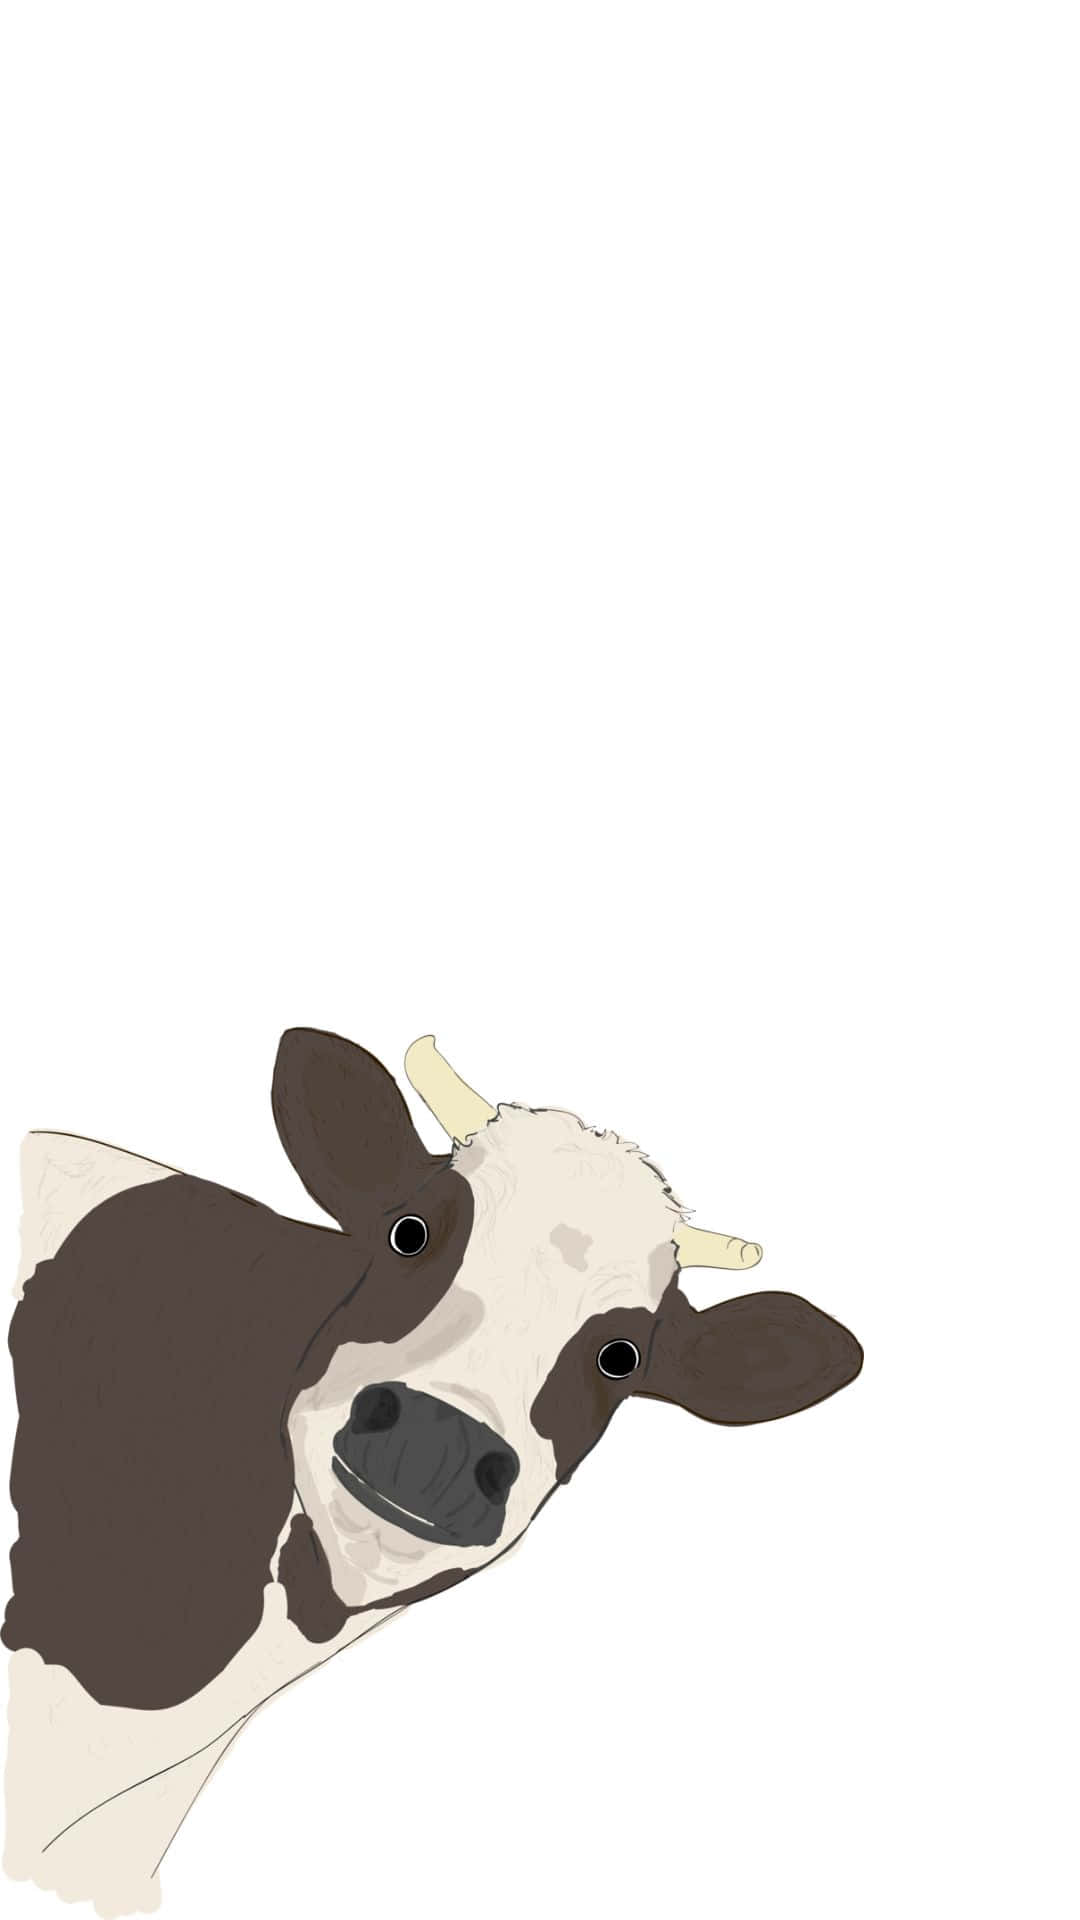 A Cow Is Looking Up Background